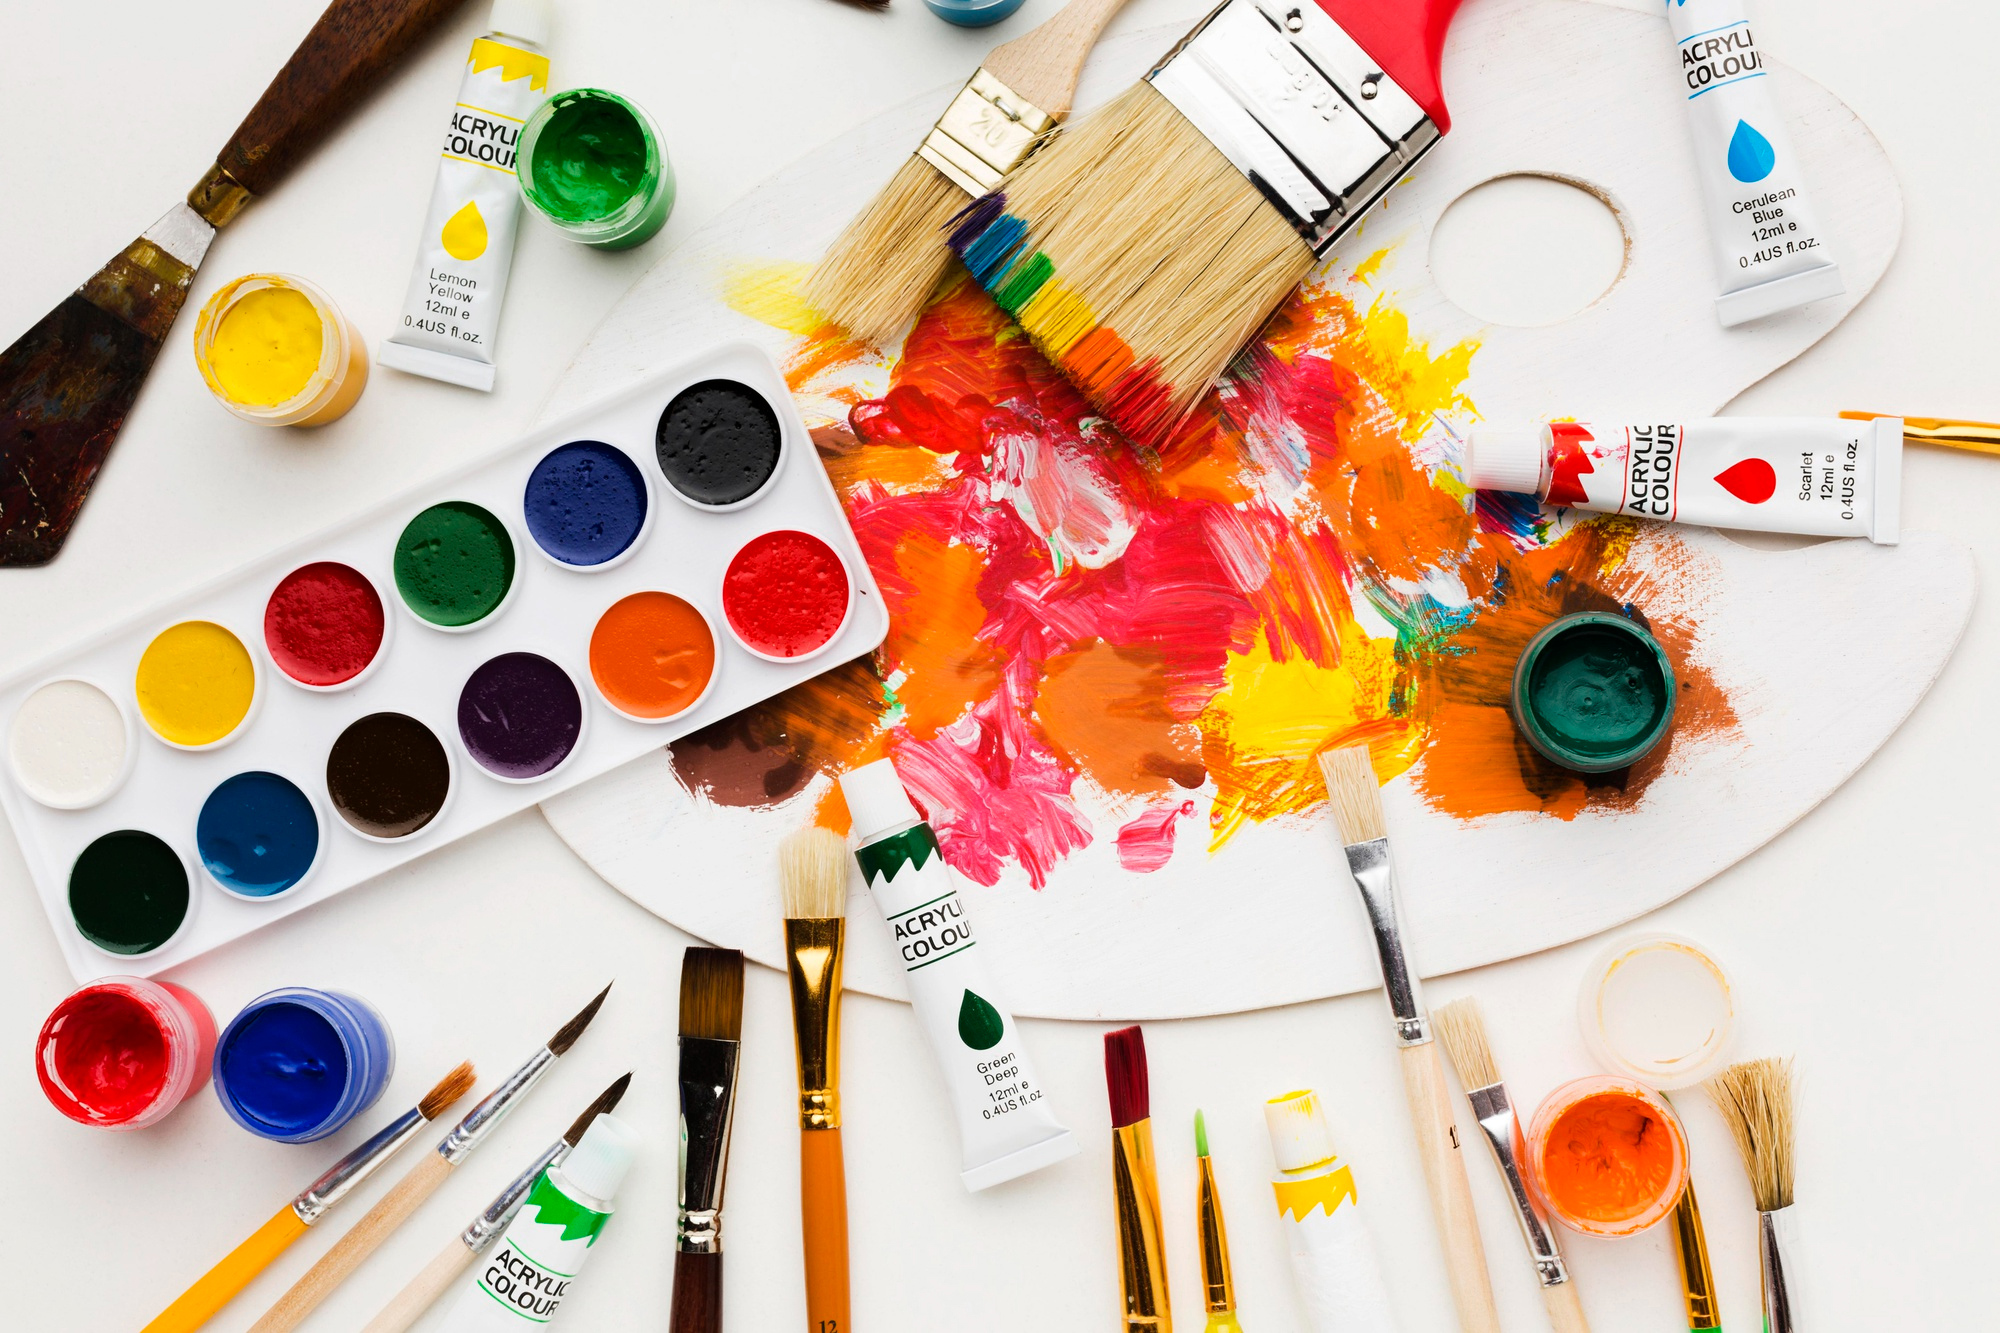 Free art materials for painters